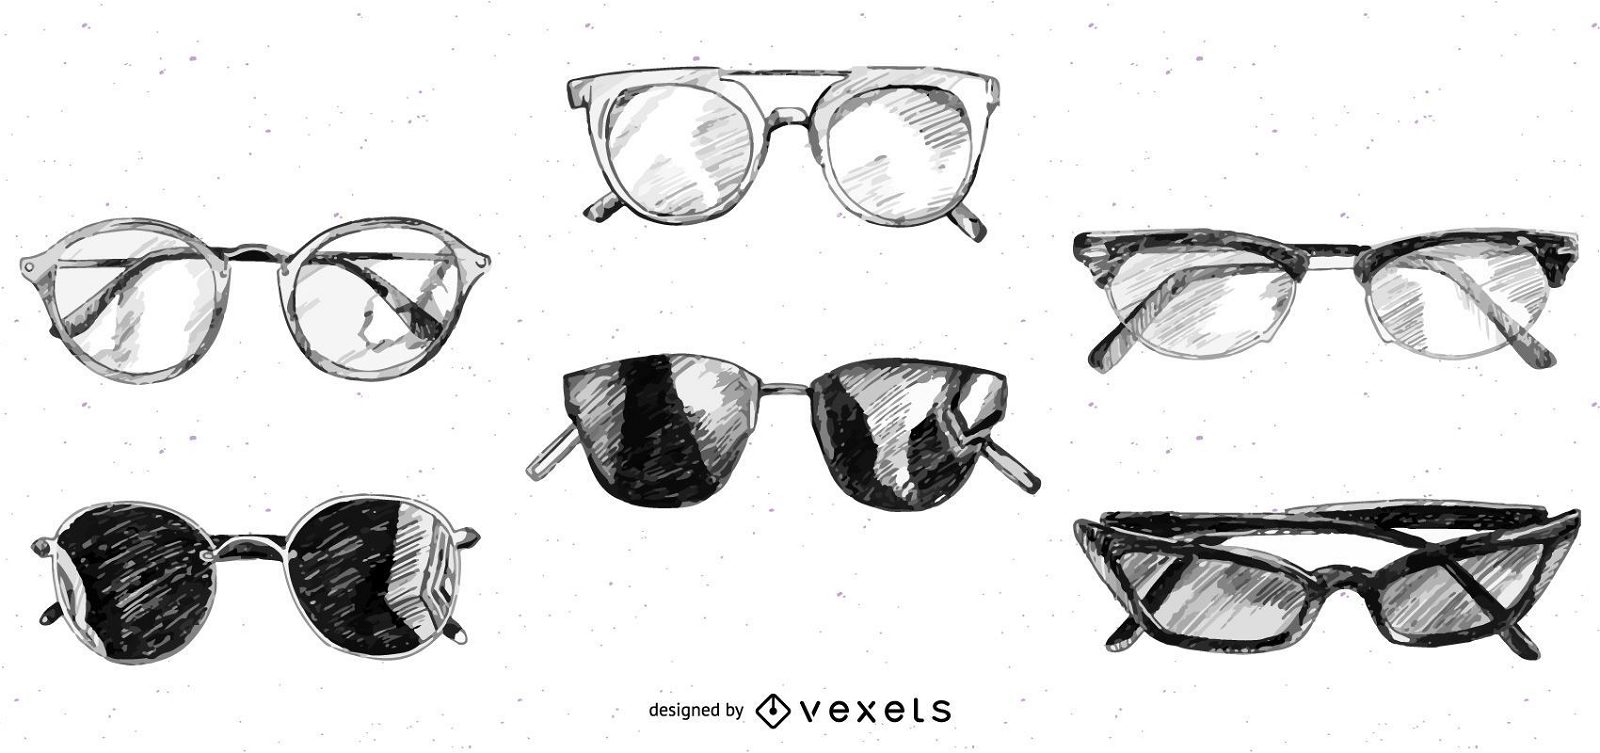 Glasses and Sunglasses Sketch Design pack